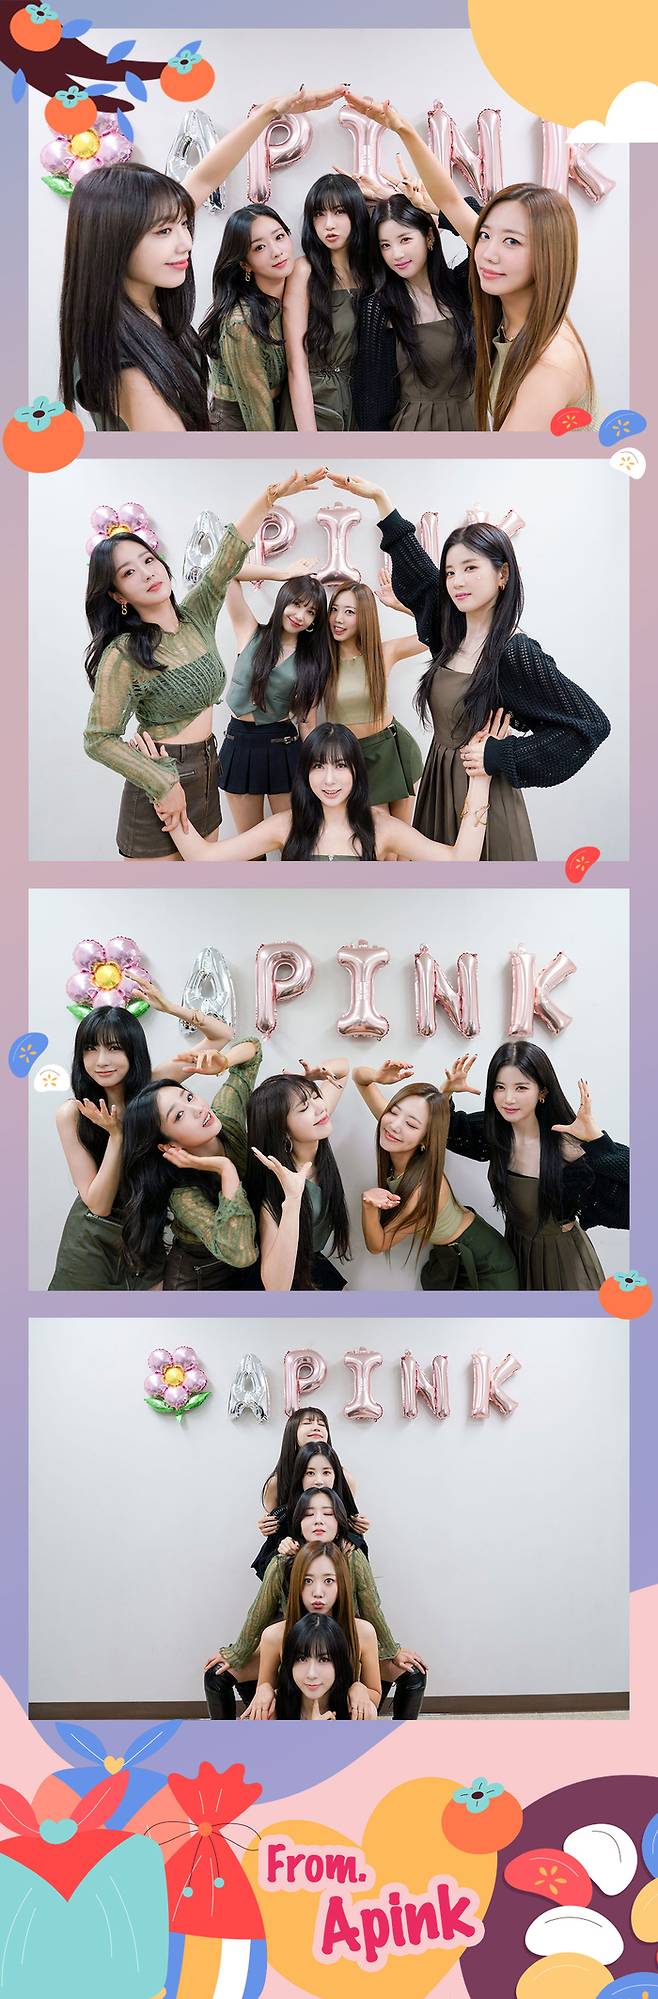 Girl group Apink (Apink) gave a welcome Chuseok greeting.Apink, on the official SNS on the 28th, celebrated the Chuseok holiday and released the Chuseok greeting video and Chuseok necktie to the fans brightly.Apink said that the cool autumn is approaching, and the pandas are having a rich holiday.Then, as long as it is a long holiday that has been around for a long time, promise me to have a pleasant holiday. After showing a sense of singing a song, I sent Chuseok filled with laughter like a bright and round full moon.In addition, Apink members presented a pleasant Chuseok gift to their fans, such as showing the friendship chemistry between the beauty and the members in the Chuseok cut image that was released together.Apink, one of the best examples of the idol group, is continuing its team activities and will continue to actively communicate with fans through personal and team activities.